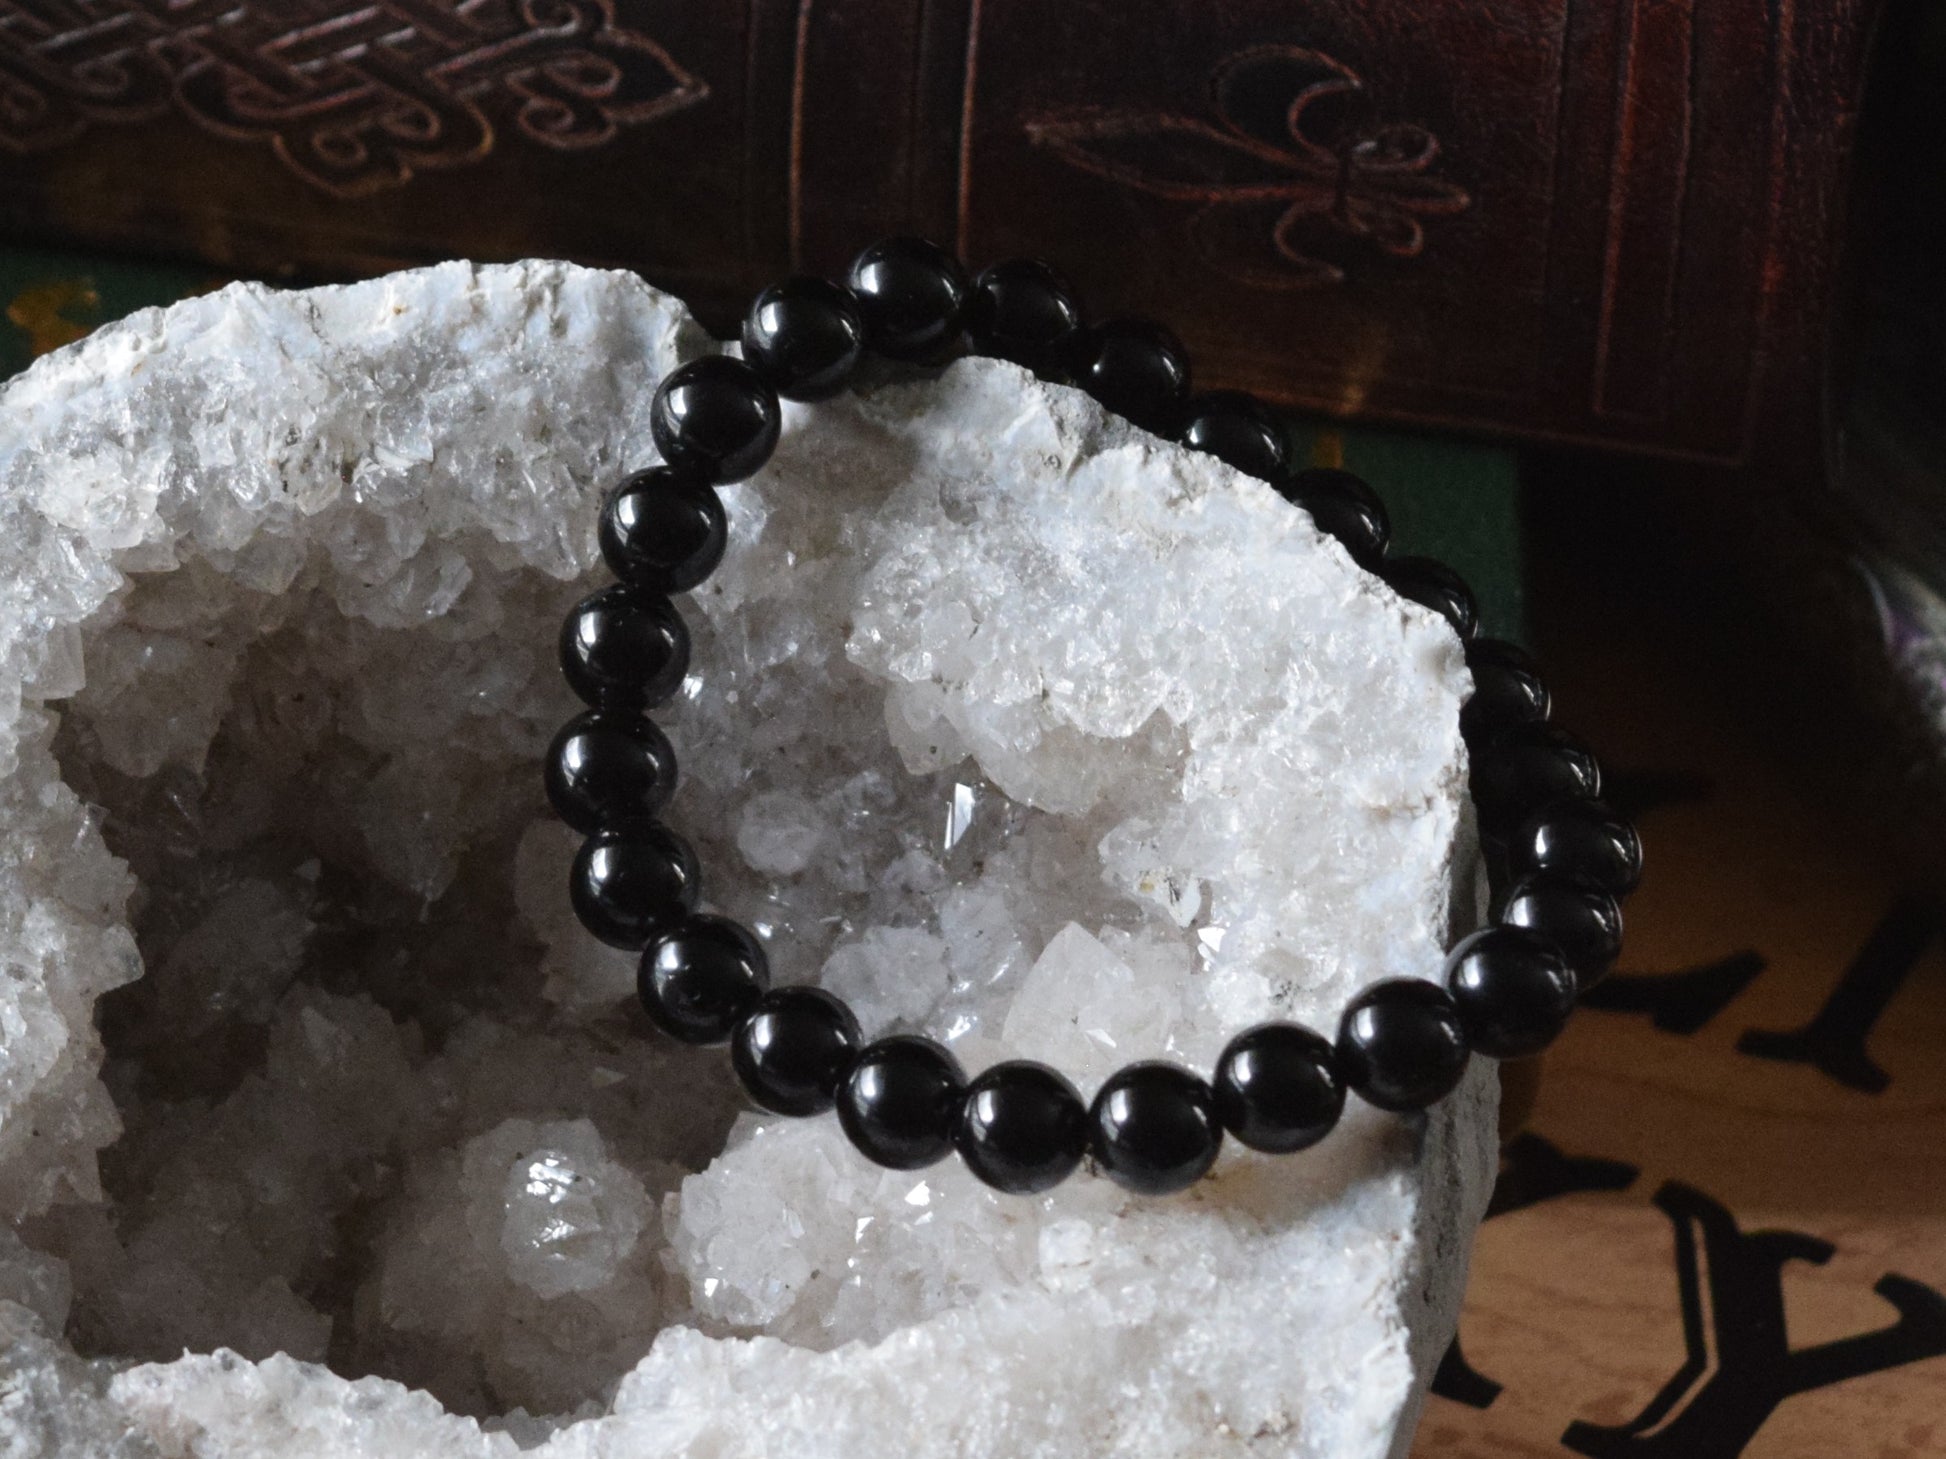 Black Obsidian Bracelet with Copper Ball Spacers - Spirit Connexions